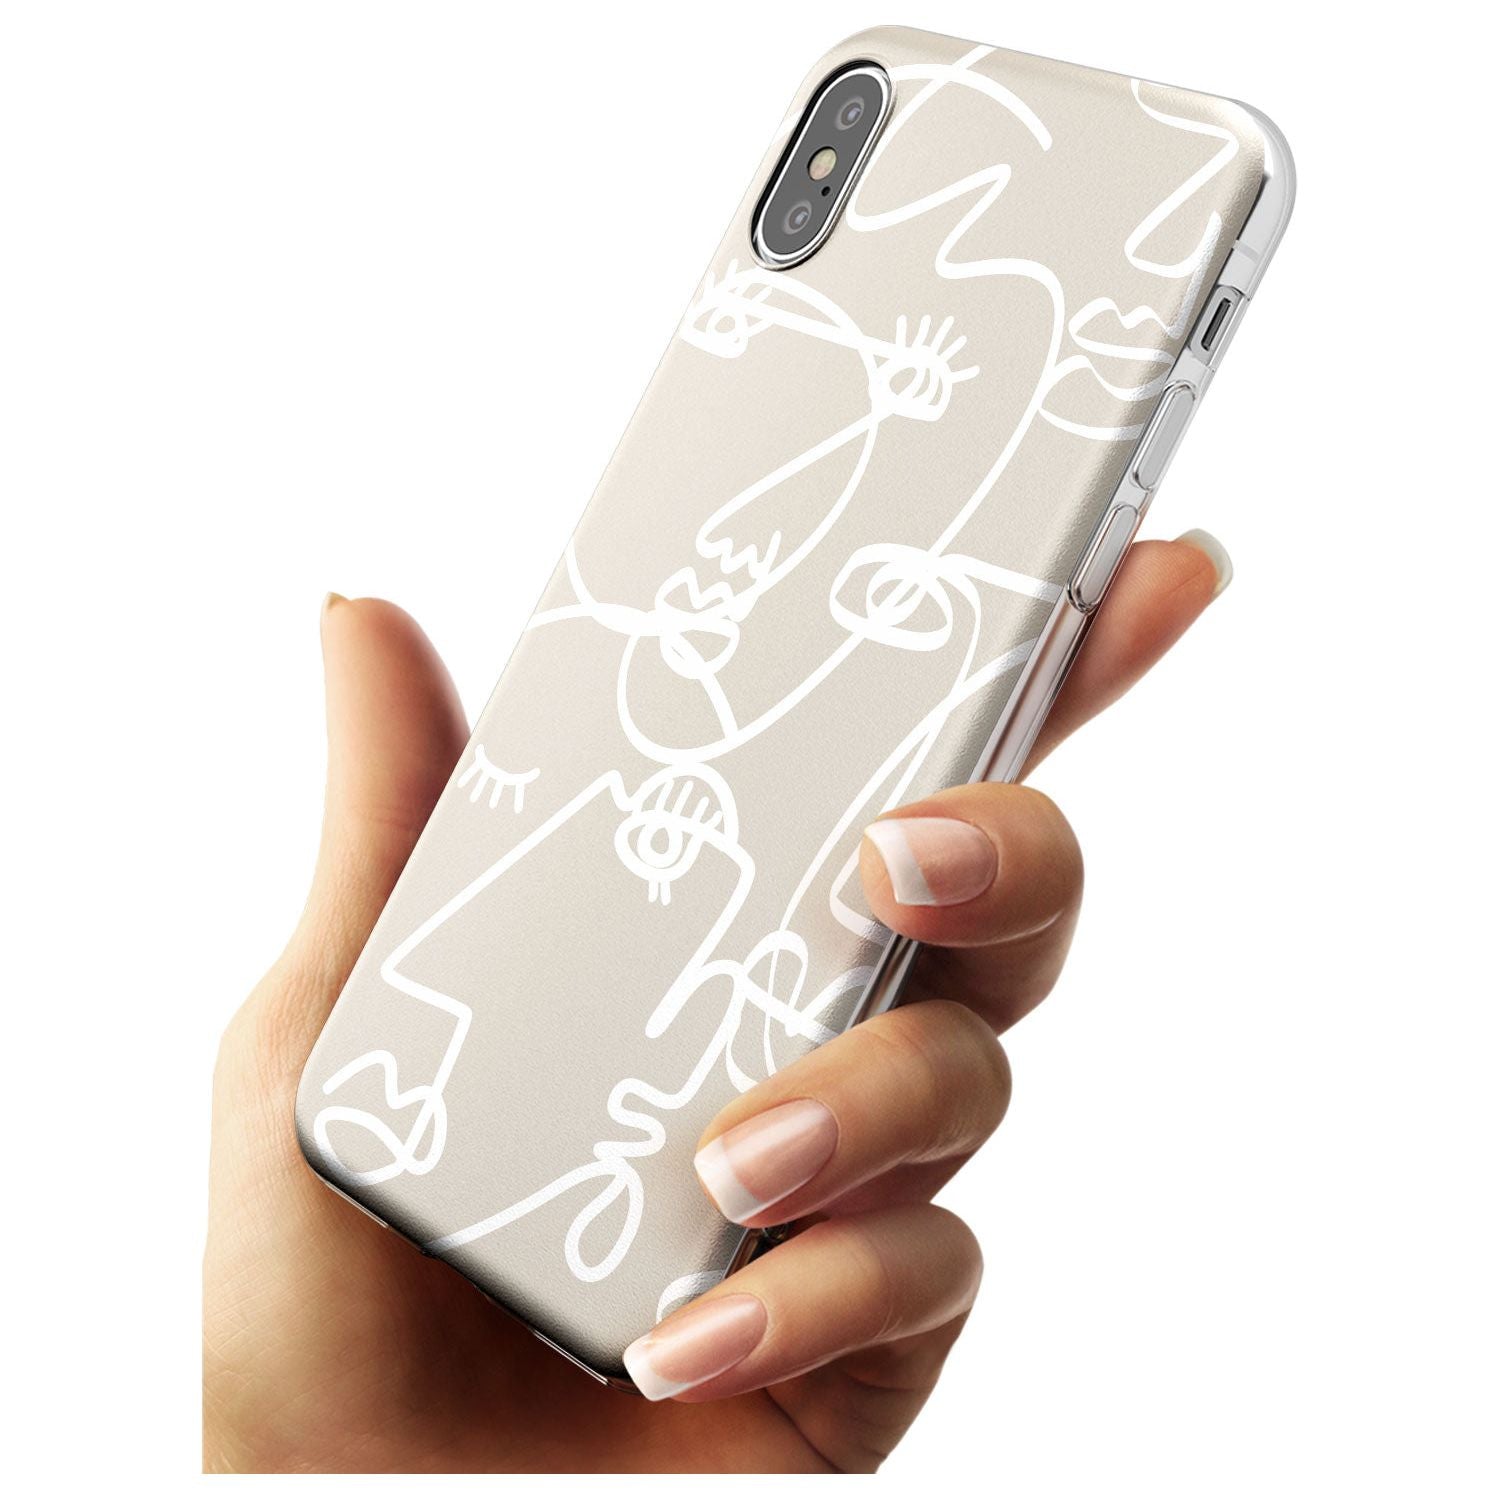 Continuous Line Faces: White on Beige Black Impact Phone Case for iPhone X XS Max XR